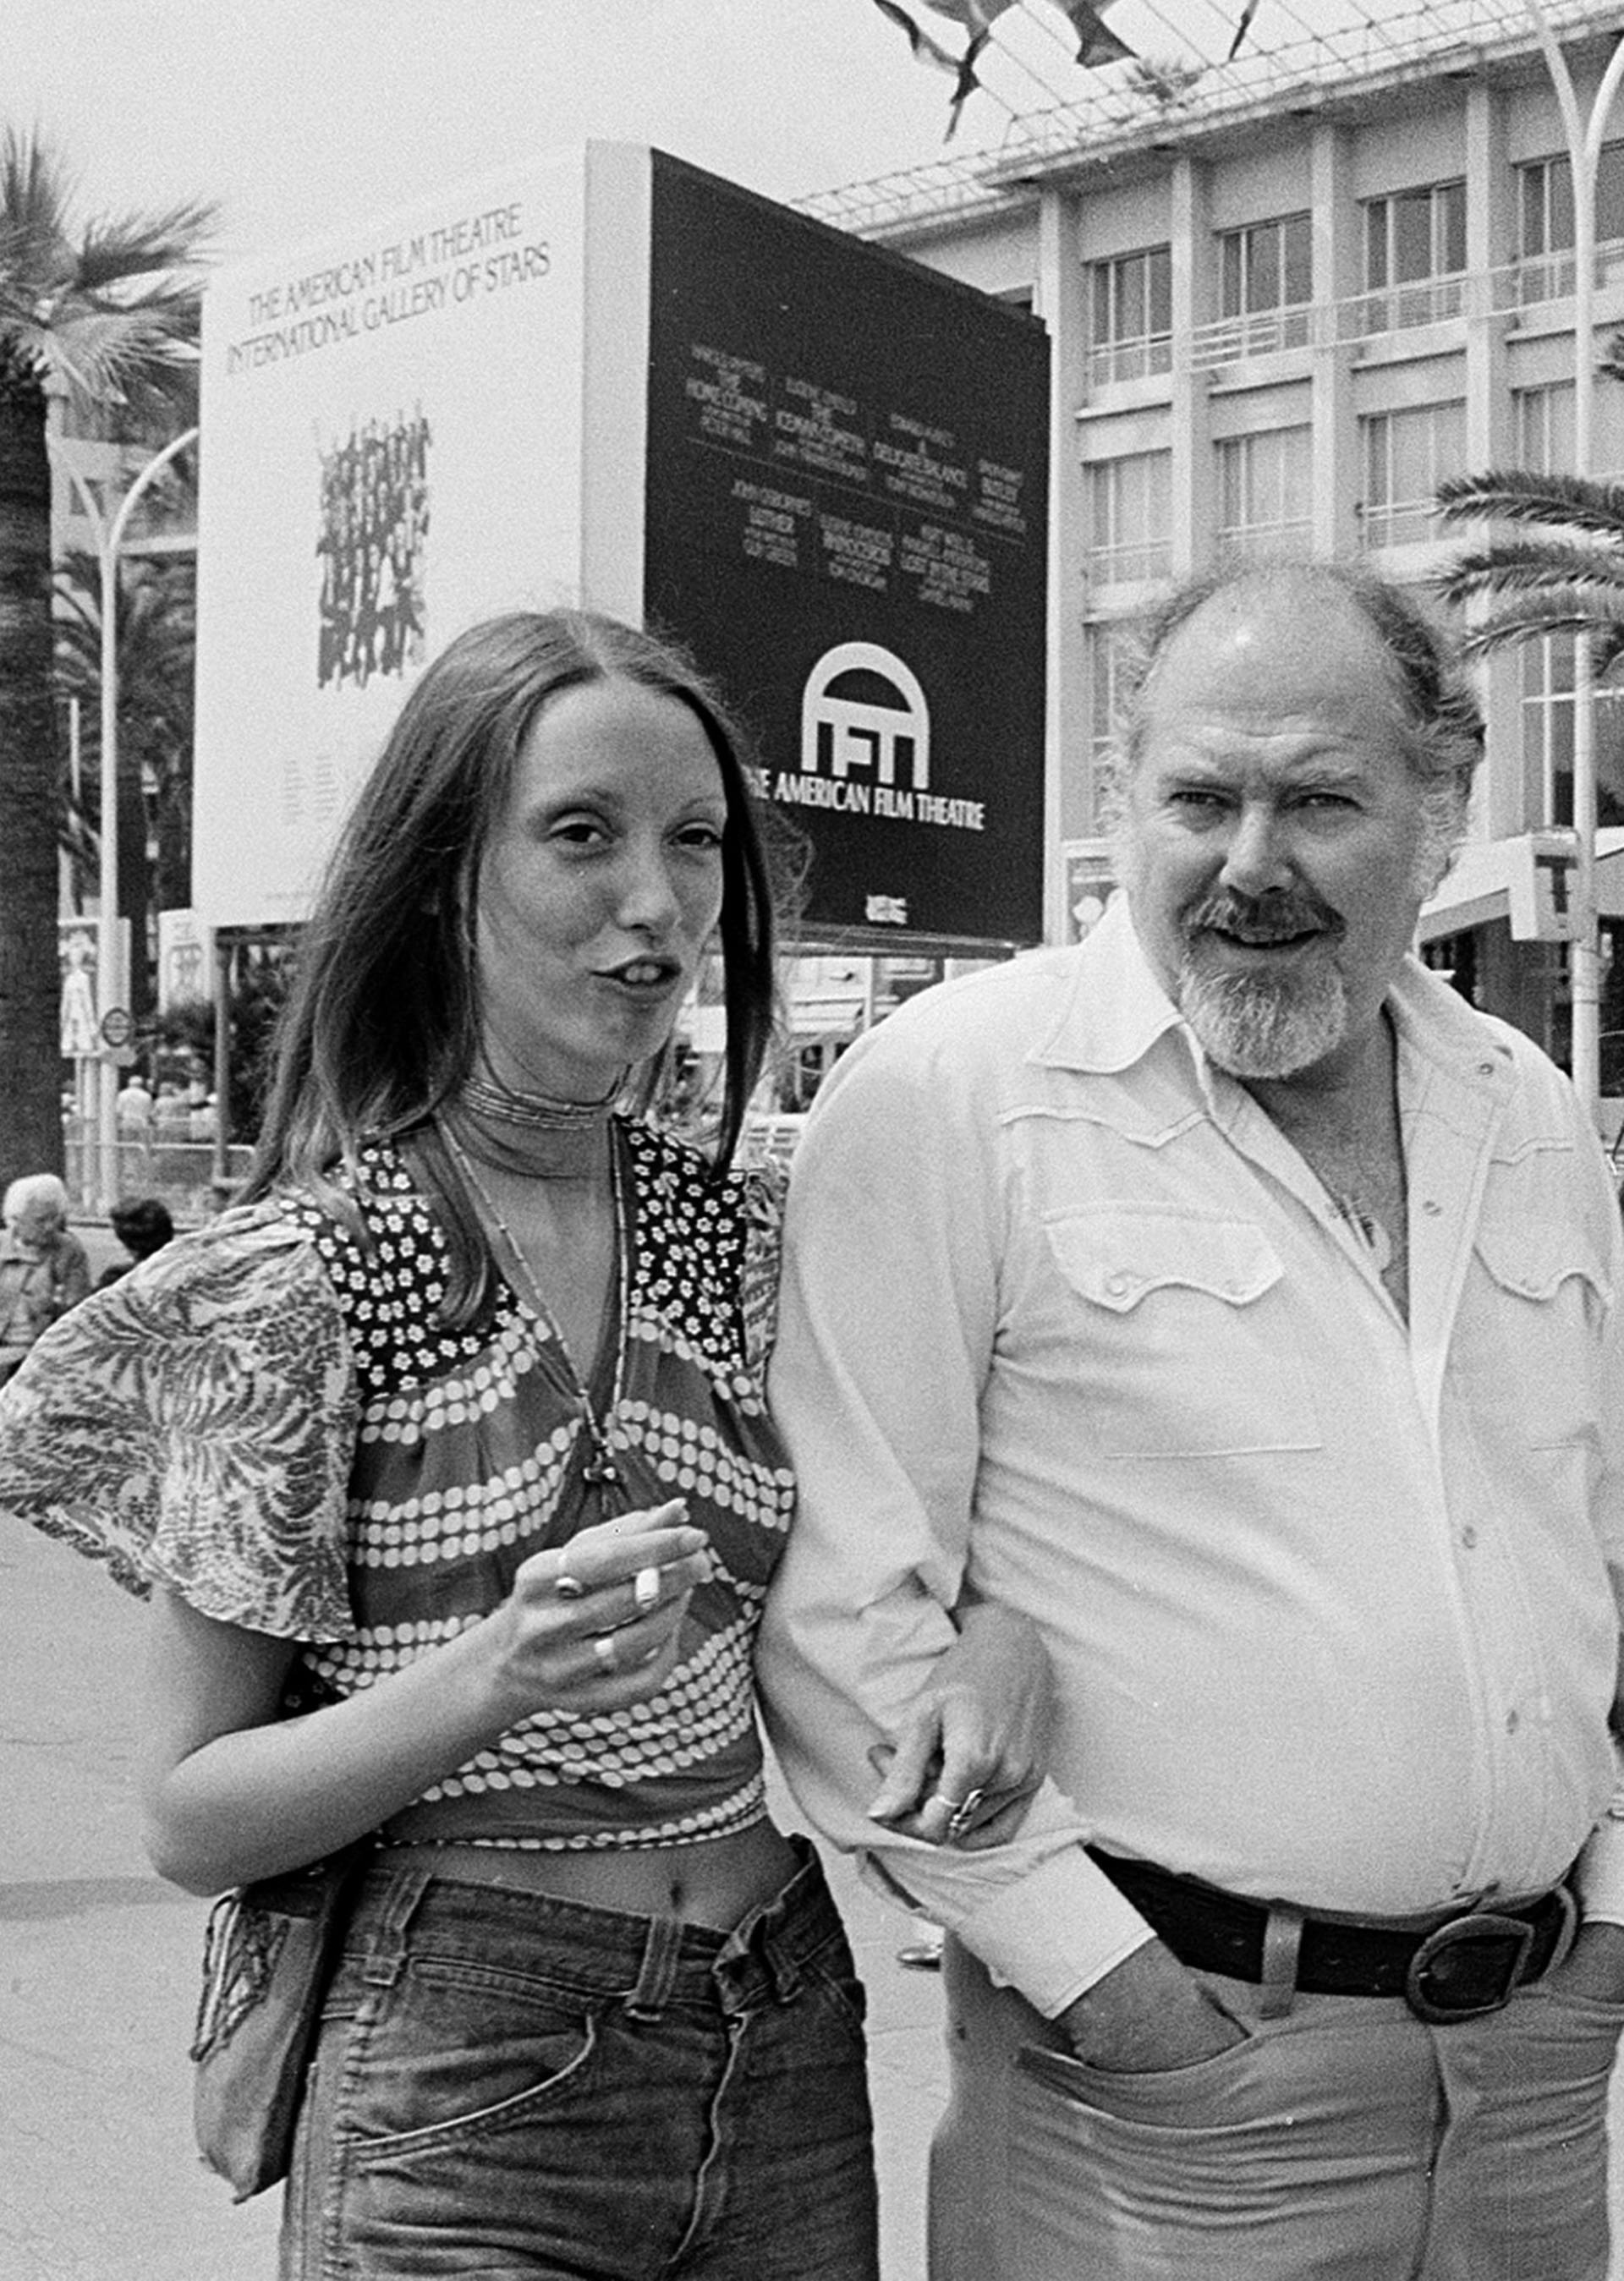 FILE - Shelley Duvall, left, and Robert Altman stroll along the Boulevard de la Croisette in Cannes, France, in May 1974. Duvall, whose wide-eyed, winsome presence was a mainstay in the films of Robert Altman and who co-starred in Stanley Kubrick's “The Shining,” has died. She was 75.  (AP Photo/Levy, File)